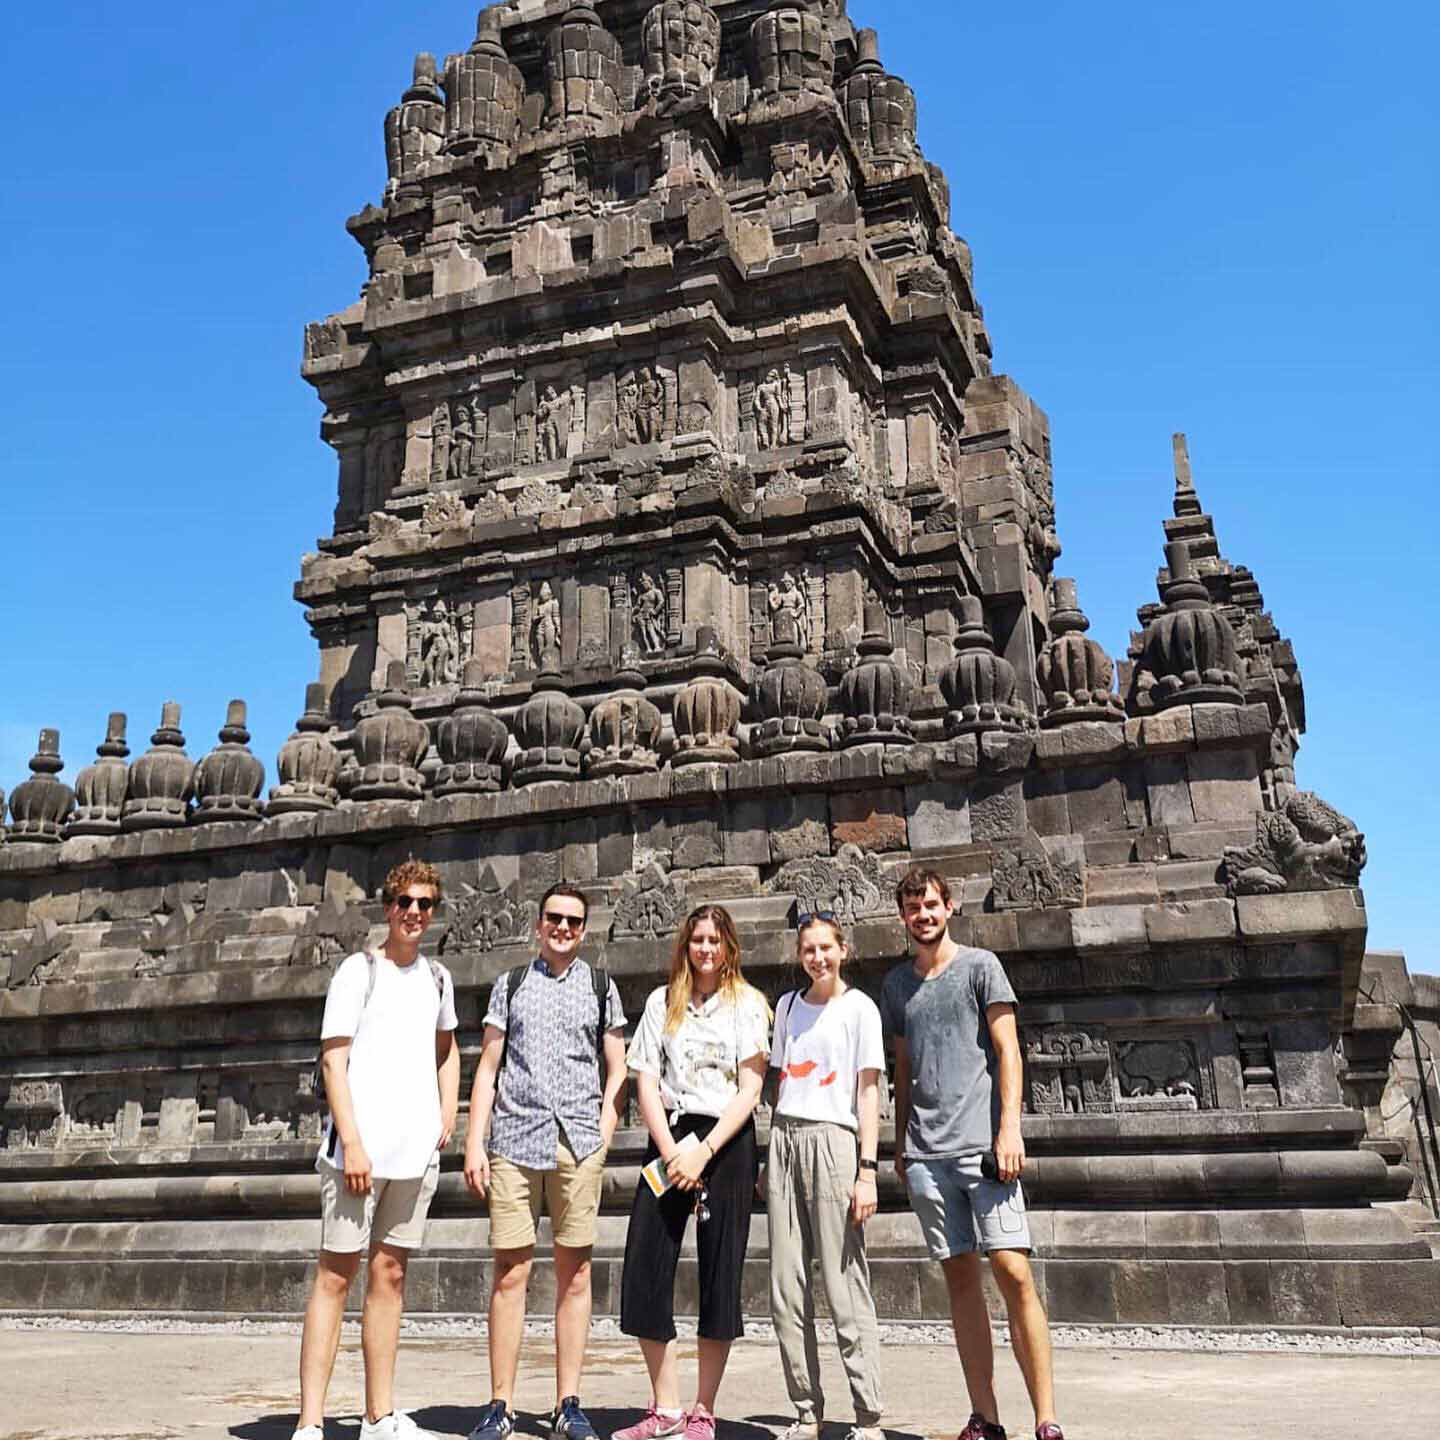 Chloe and four friends standing in front of the Prambanan Temple, a 9th century Hindu temple in Yogyakarta